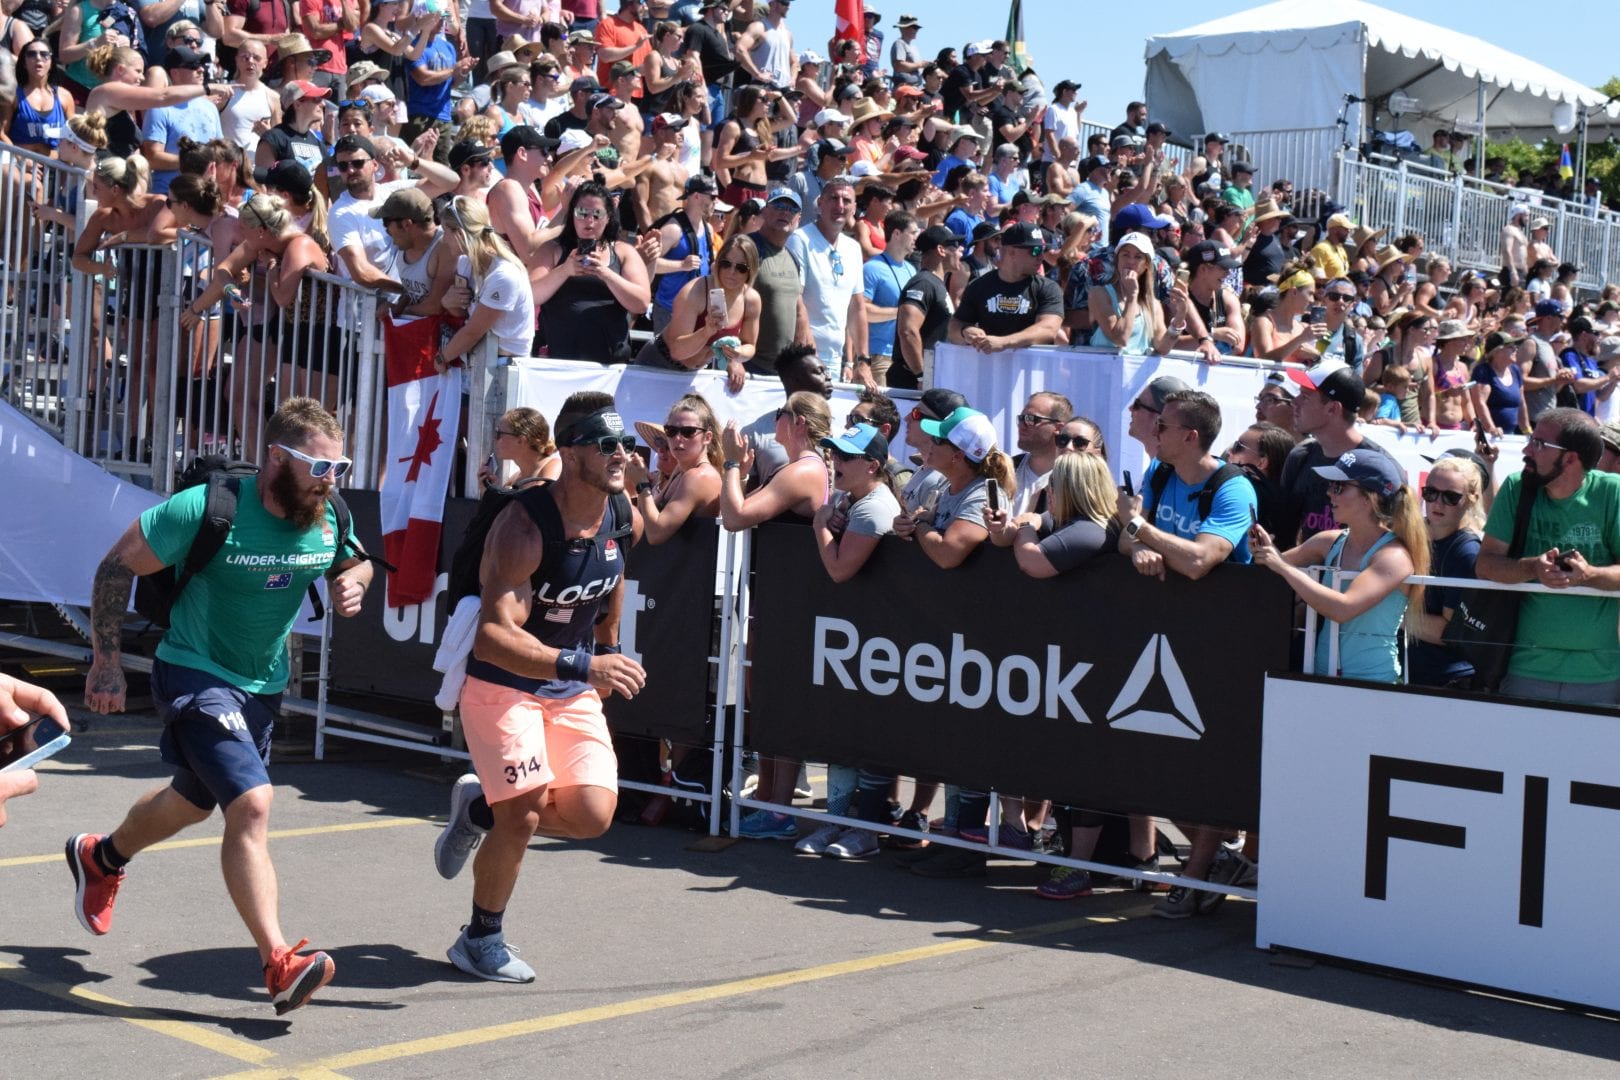 Nick Bloch of the United States completes the Ruck Run event at the 2019 CrossFit Games